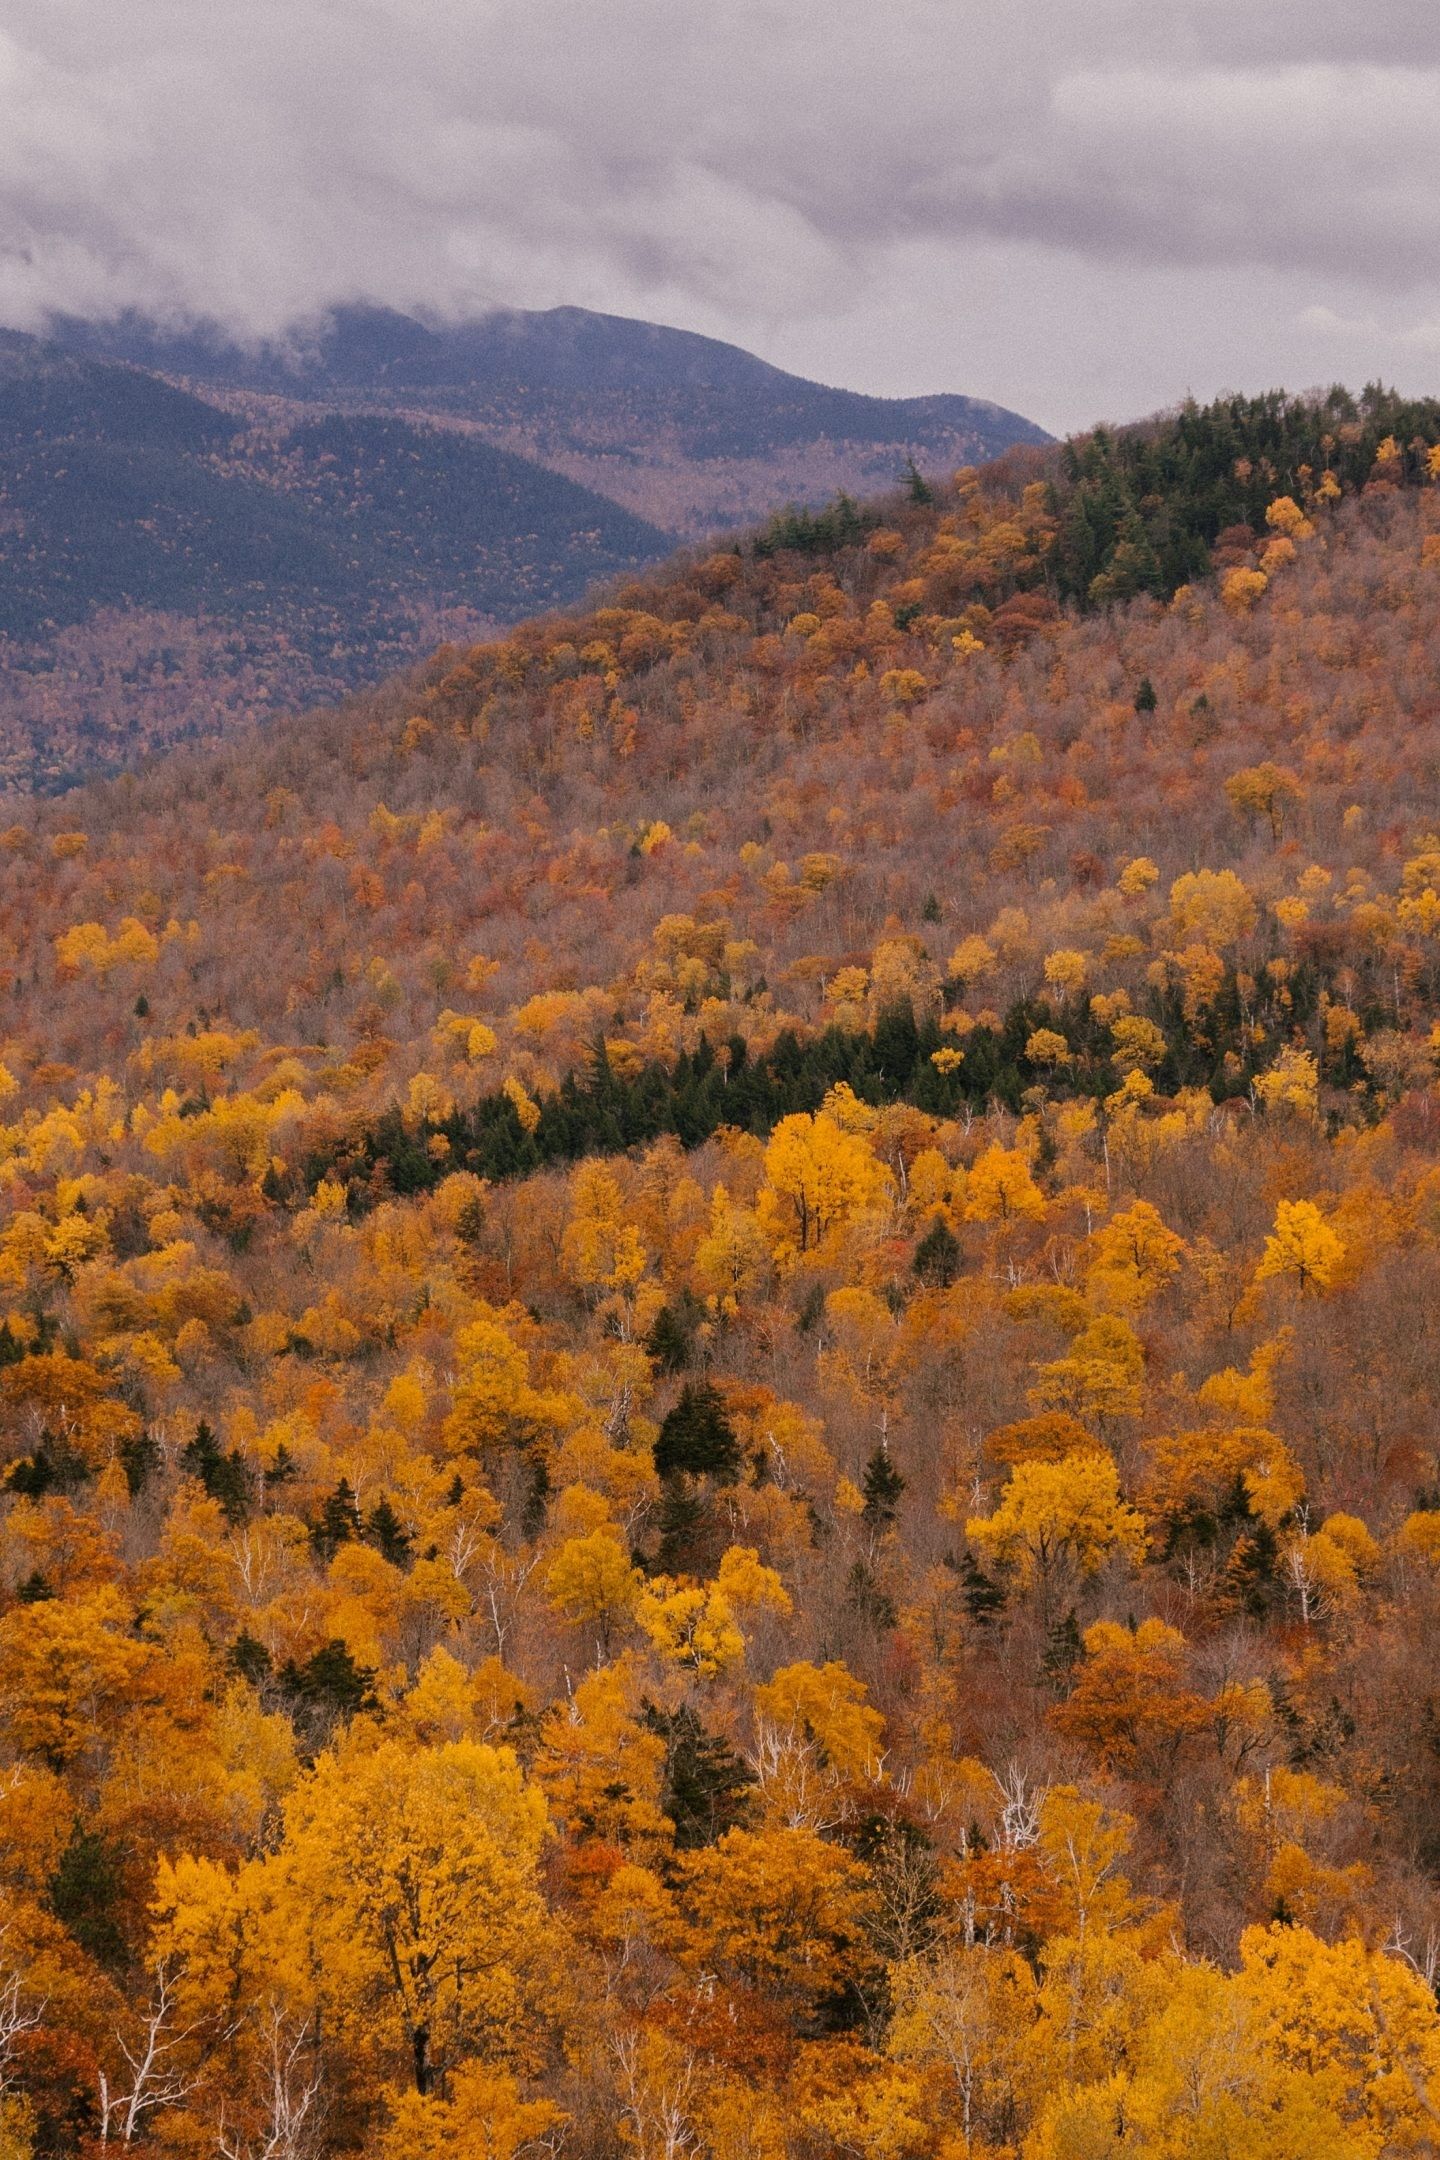 A mountain range with a forest of trees turning yellow and orange in the fall. - Vintage fall